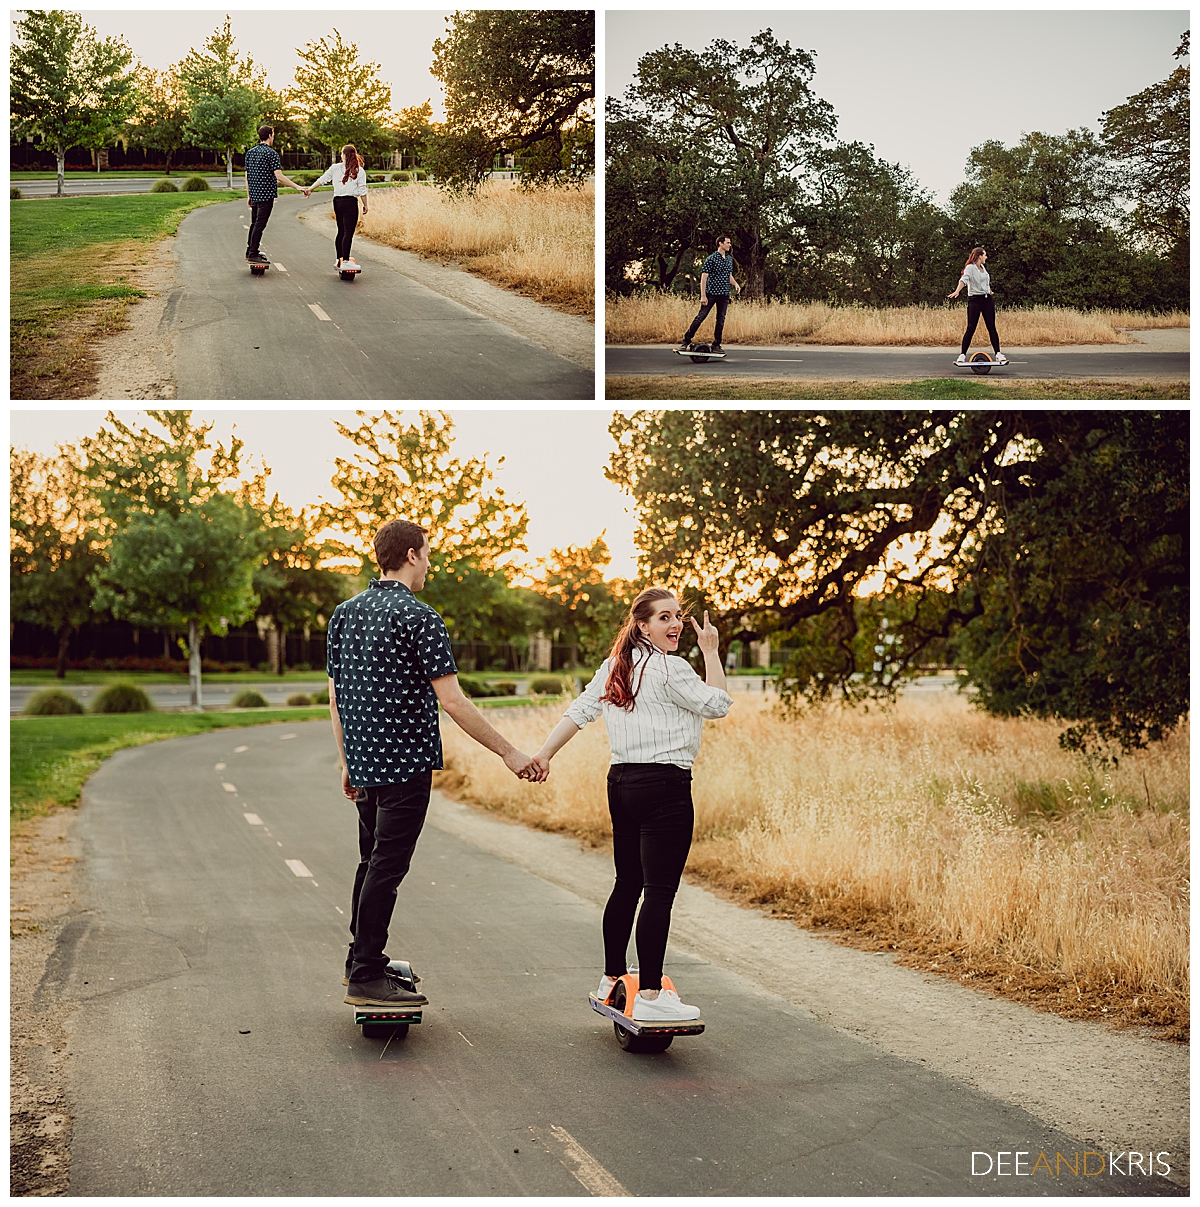 Three images: Top left image of couple holding hands on individual hover boards moving away from camera. Top right image of couple on individual hover boards taken from a side view. Bottom image of  couple on individual hover boards holding hand moving away from the camera as woman looks back with fingers in a peace sign.